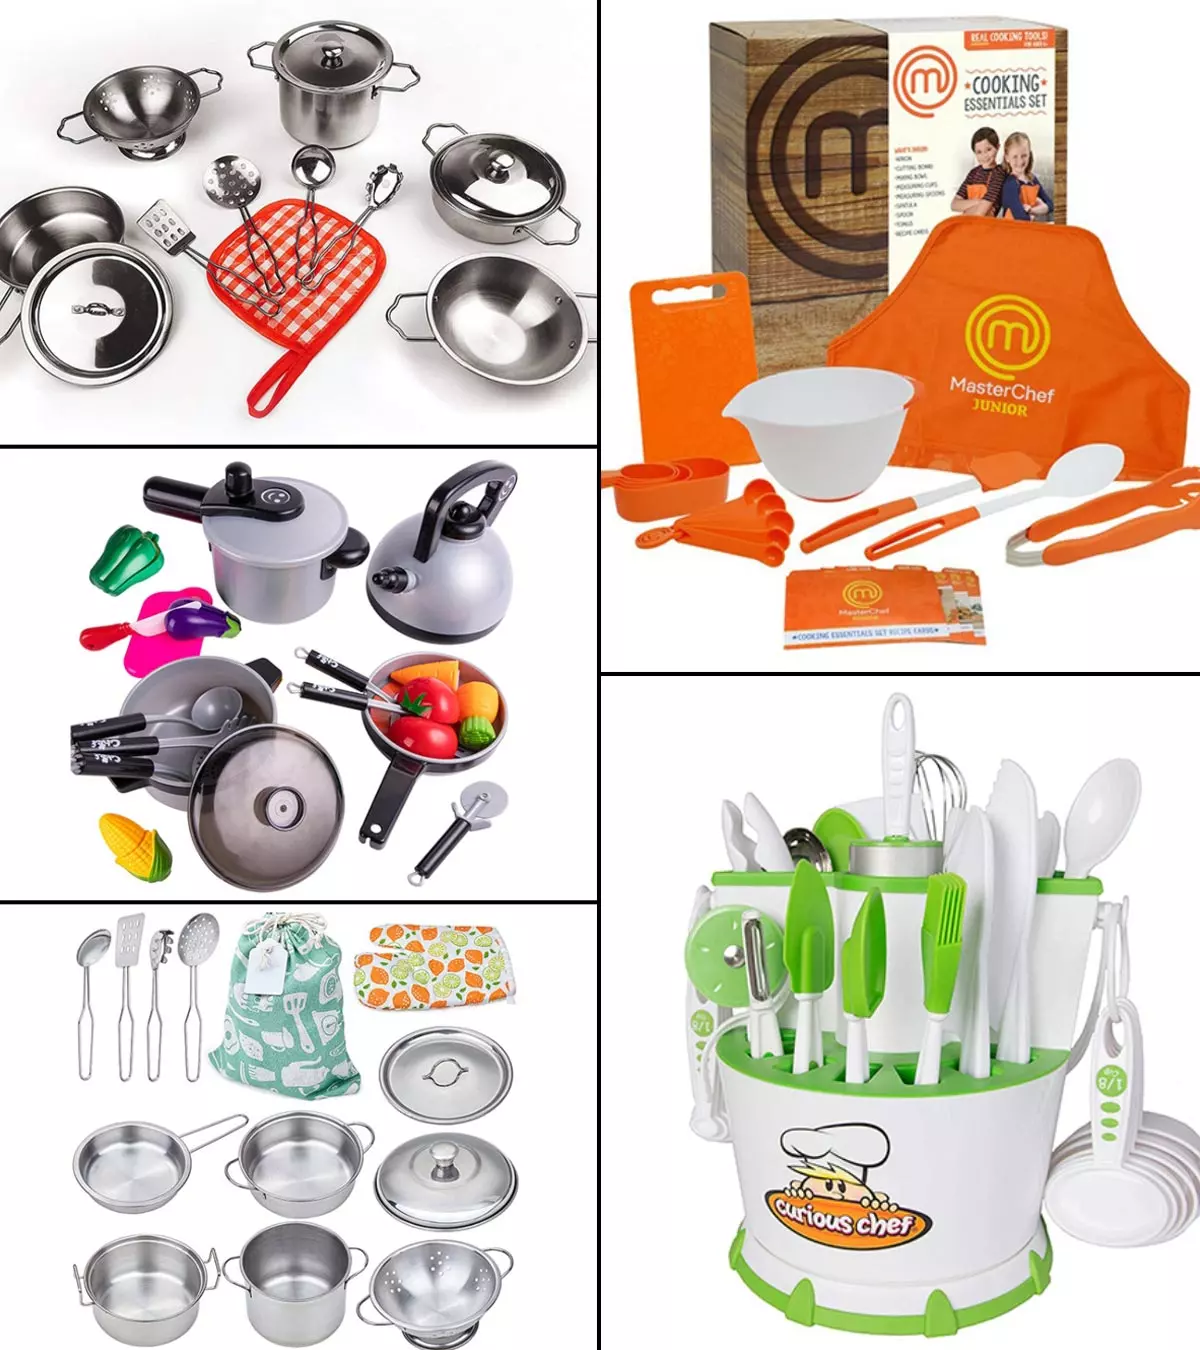 Cooking kits introduce children to lessons in cooking, nutrition, and the value of food.